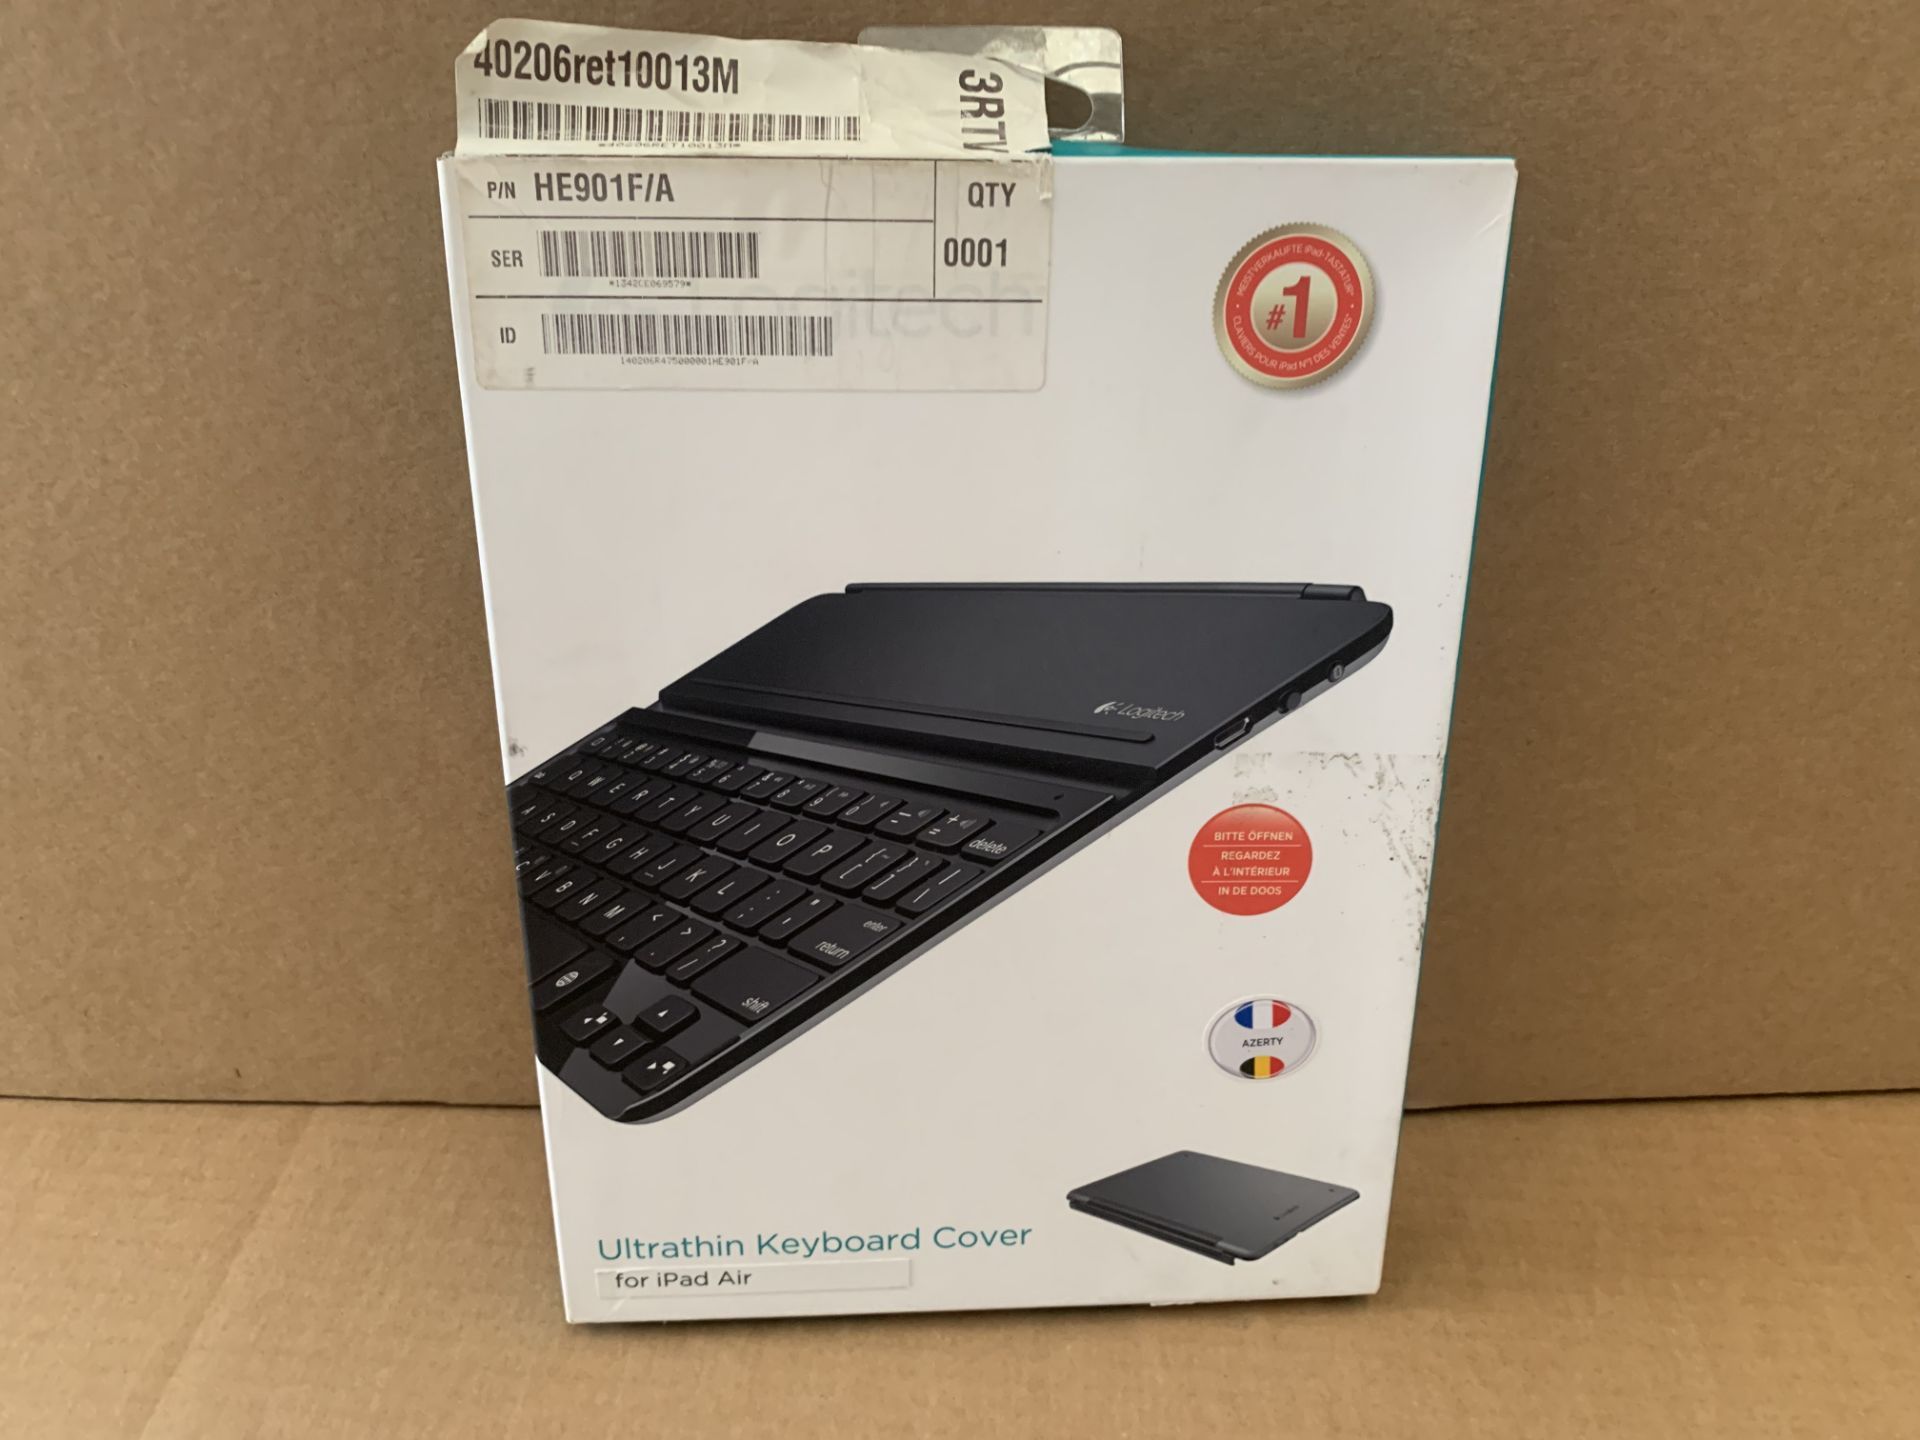 10 X BRAND NEW LOGITECH ULTHARIN KEYBOARDS FOR IPAD AIR (FRENCH) (1273/15)